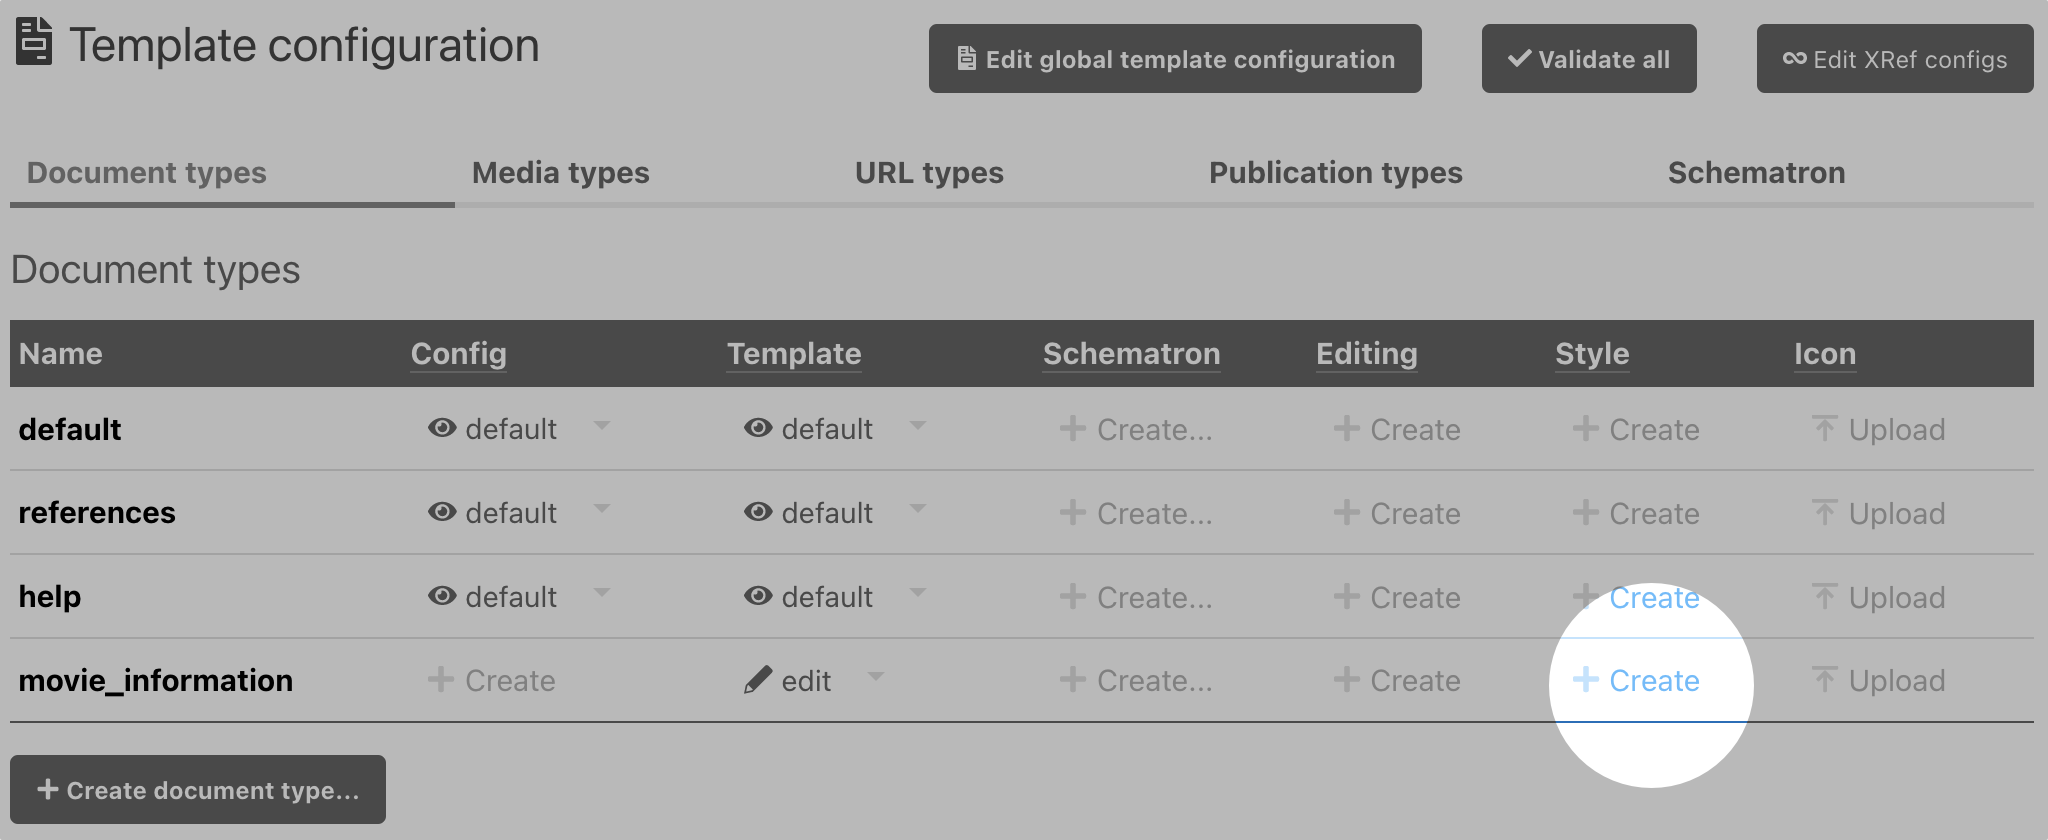 Template configuration – Style